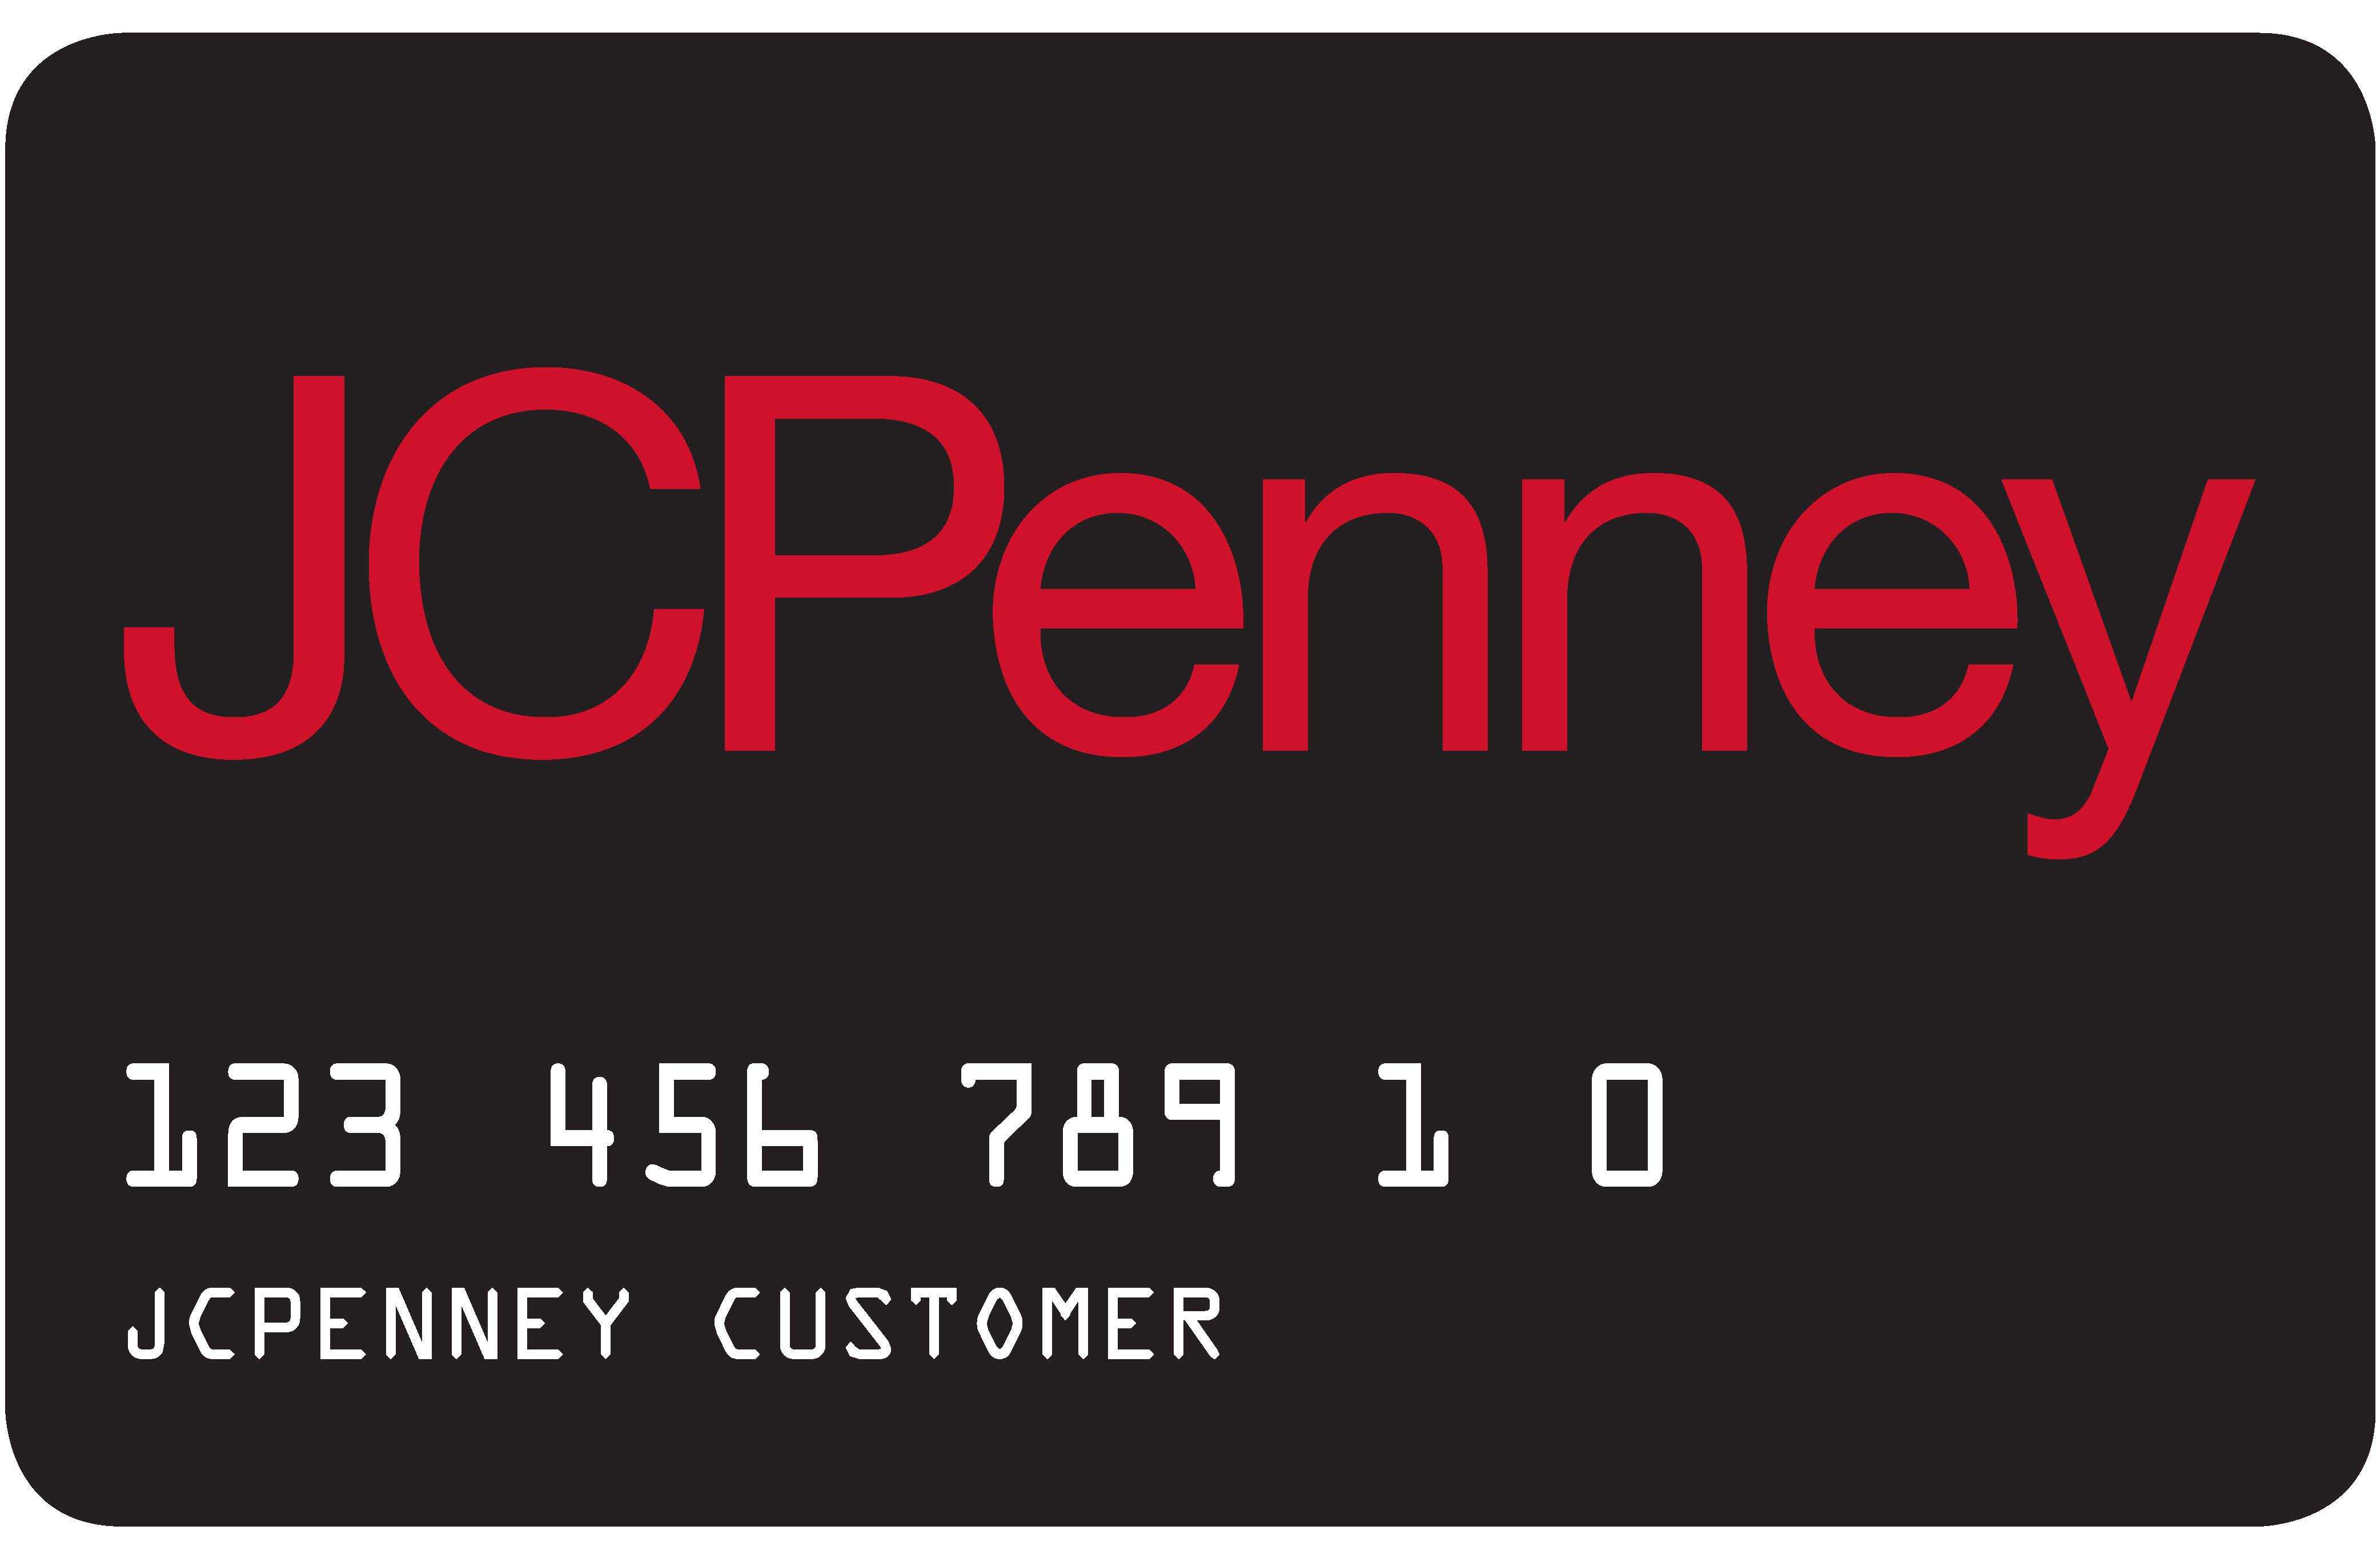 Apple Pay Credit Card Logo - Synchrony Financial Integrates Private Label Credit Cards and ...